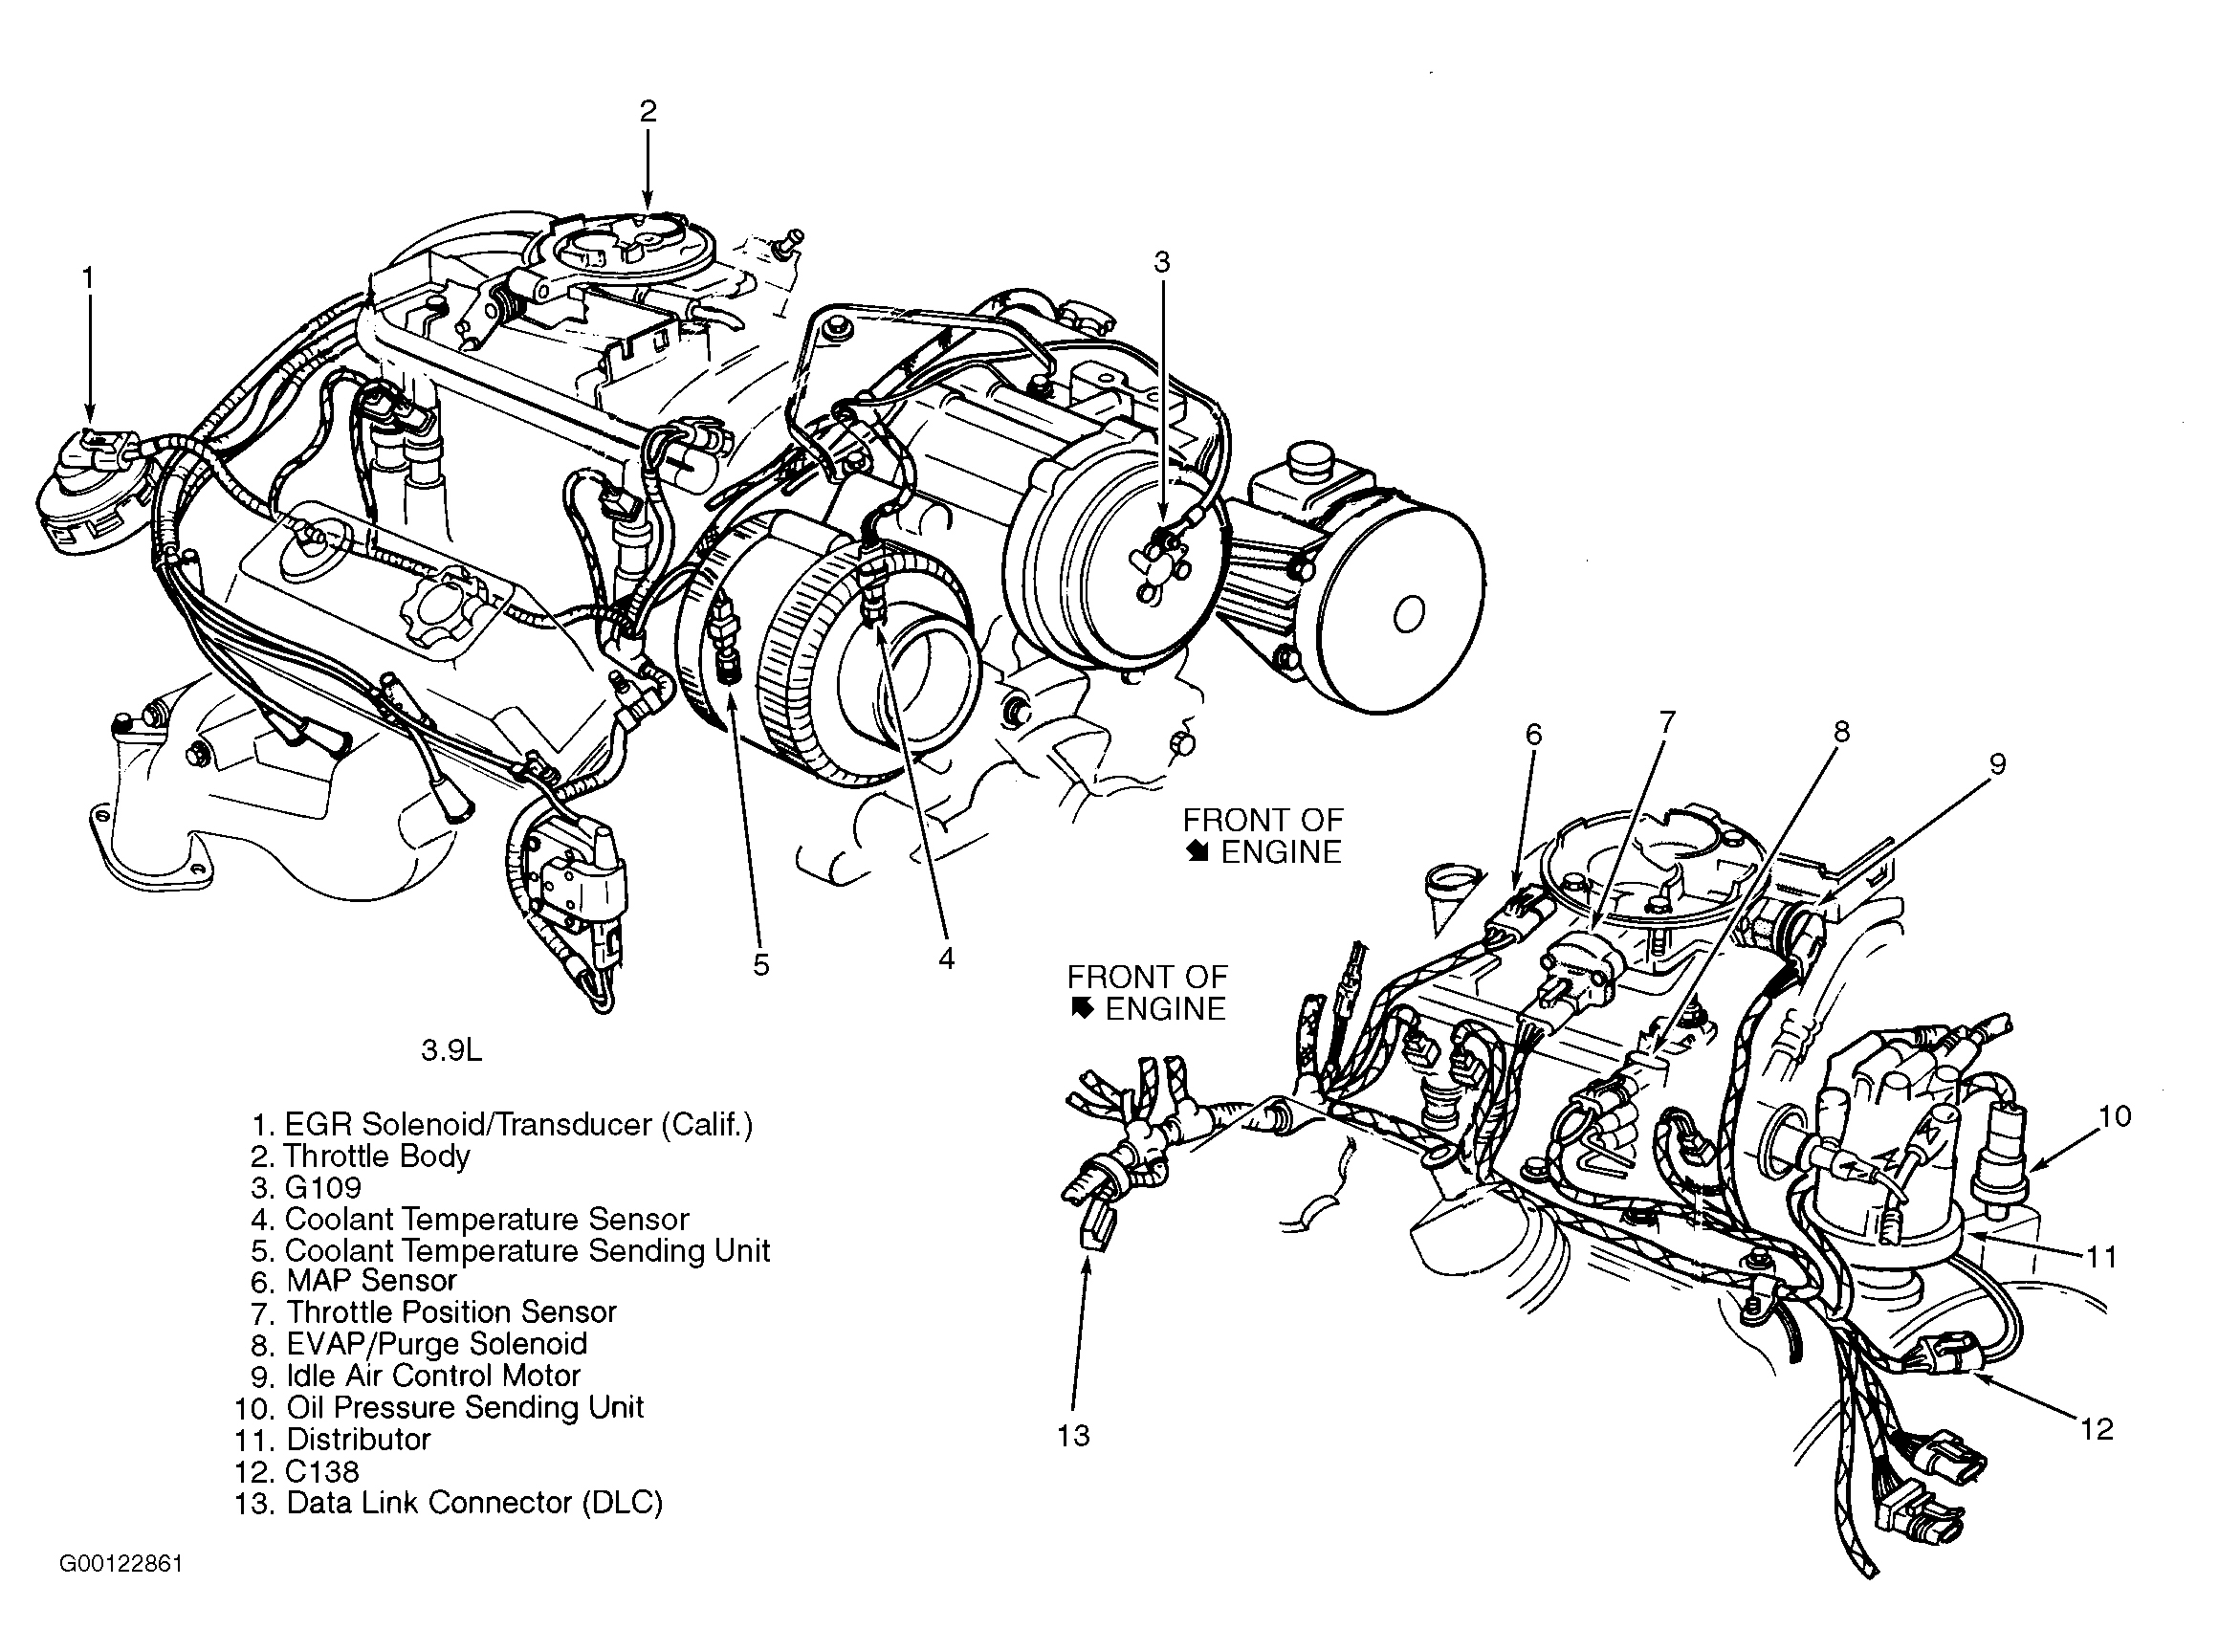 Dodge Ram Wagon B2500 1995 - Component Locations -  Right Front Of Engine, Left Side Of Engine